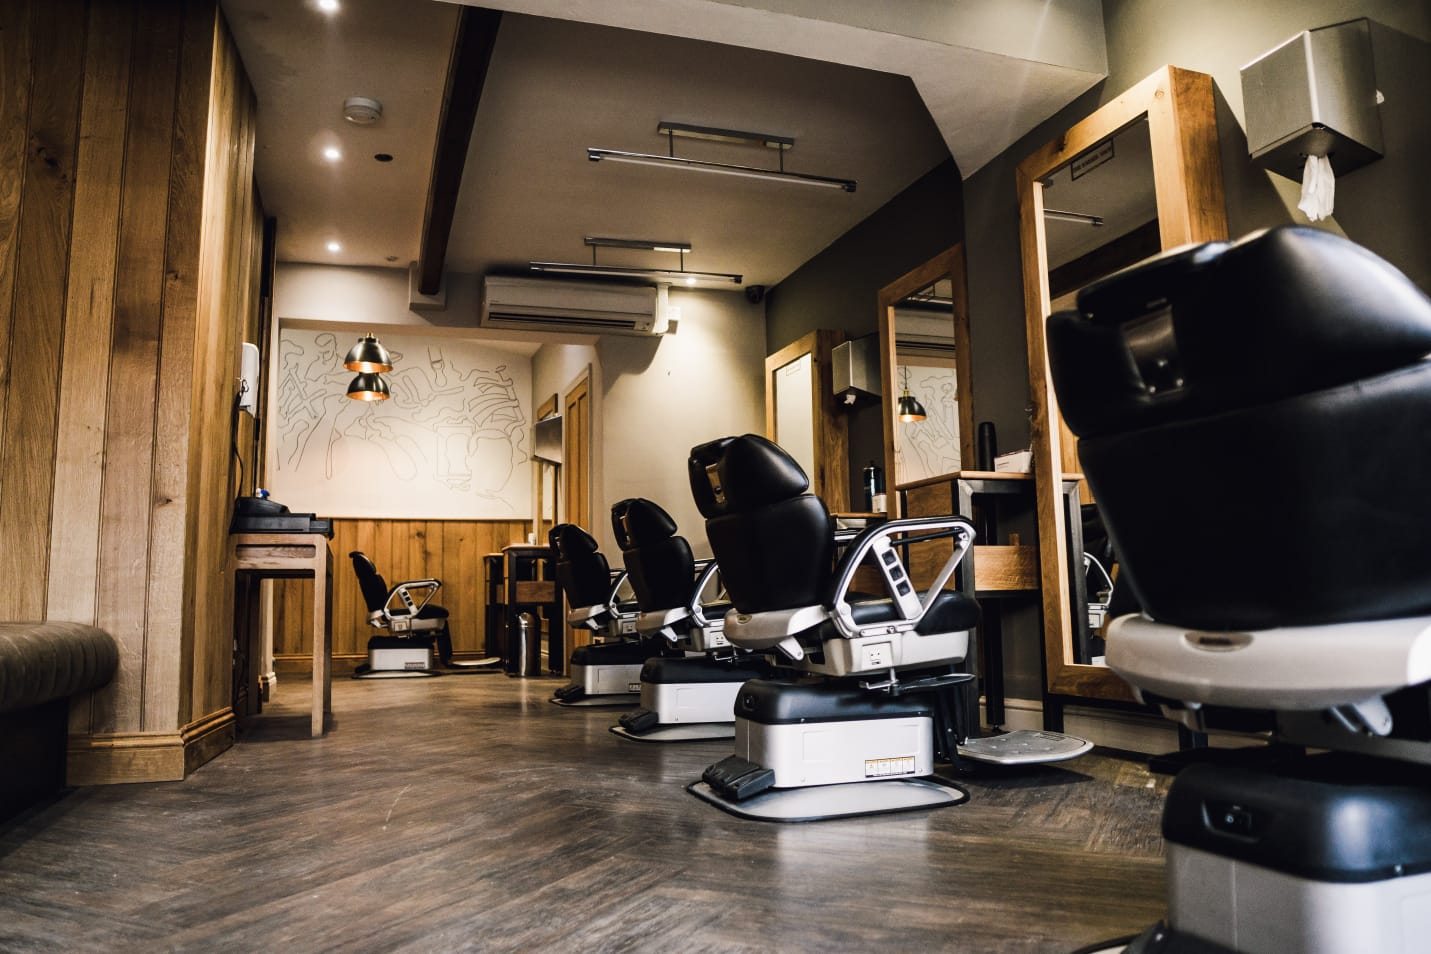 FEATURED | The Barber Shop in Hereford to re-open this Saturday